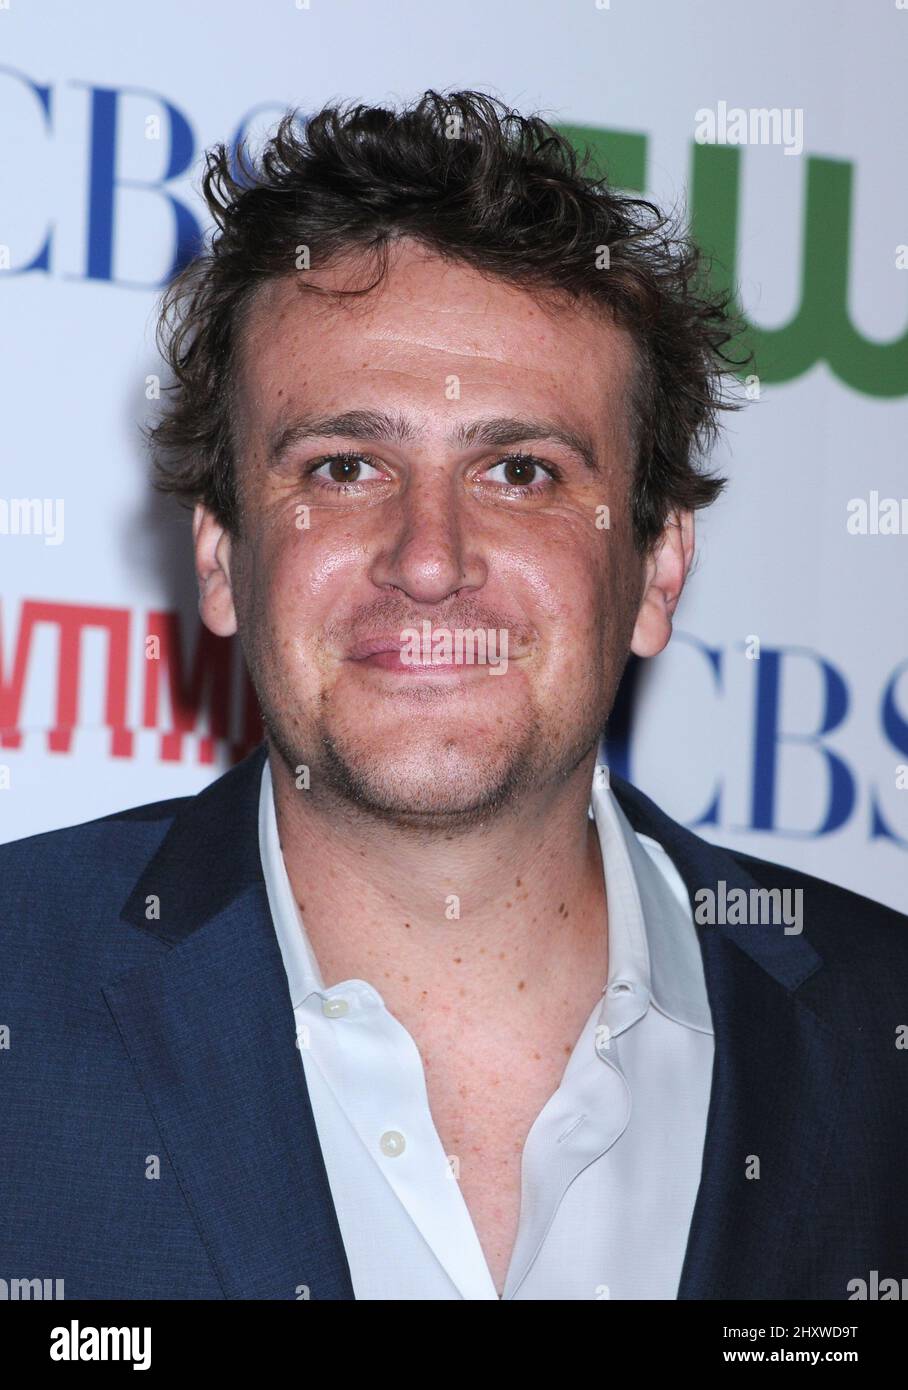 Jason Segel during the CBS,The CW And Showtime TCA Party held at The Pagoda, California Stock Photo